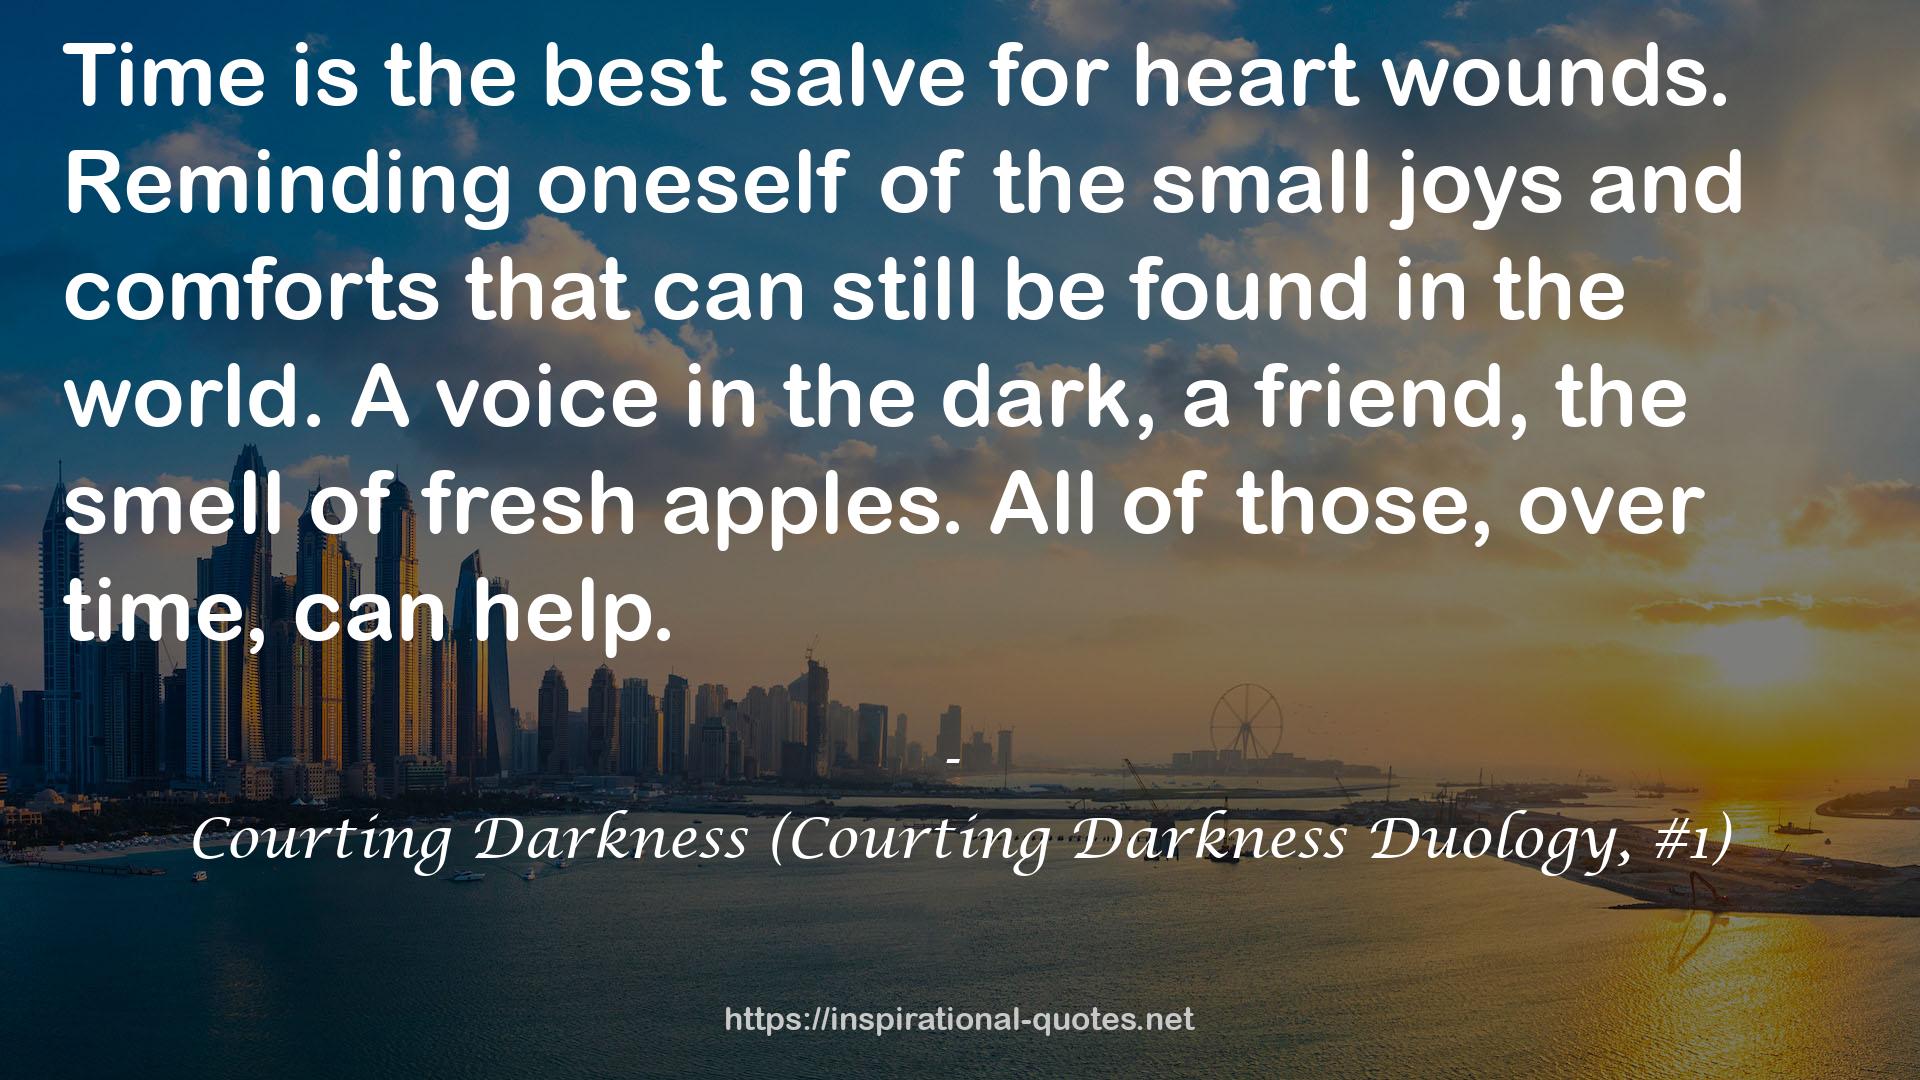 Courting Darkness (Courting Darkness Duology, #1) QUOTES